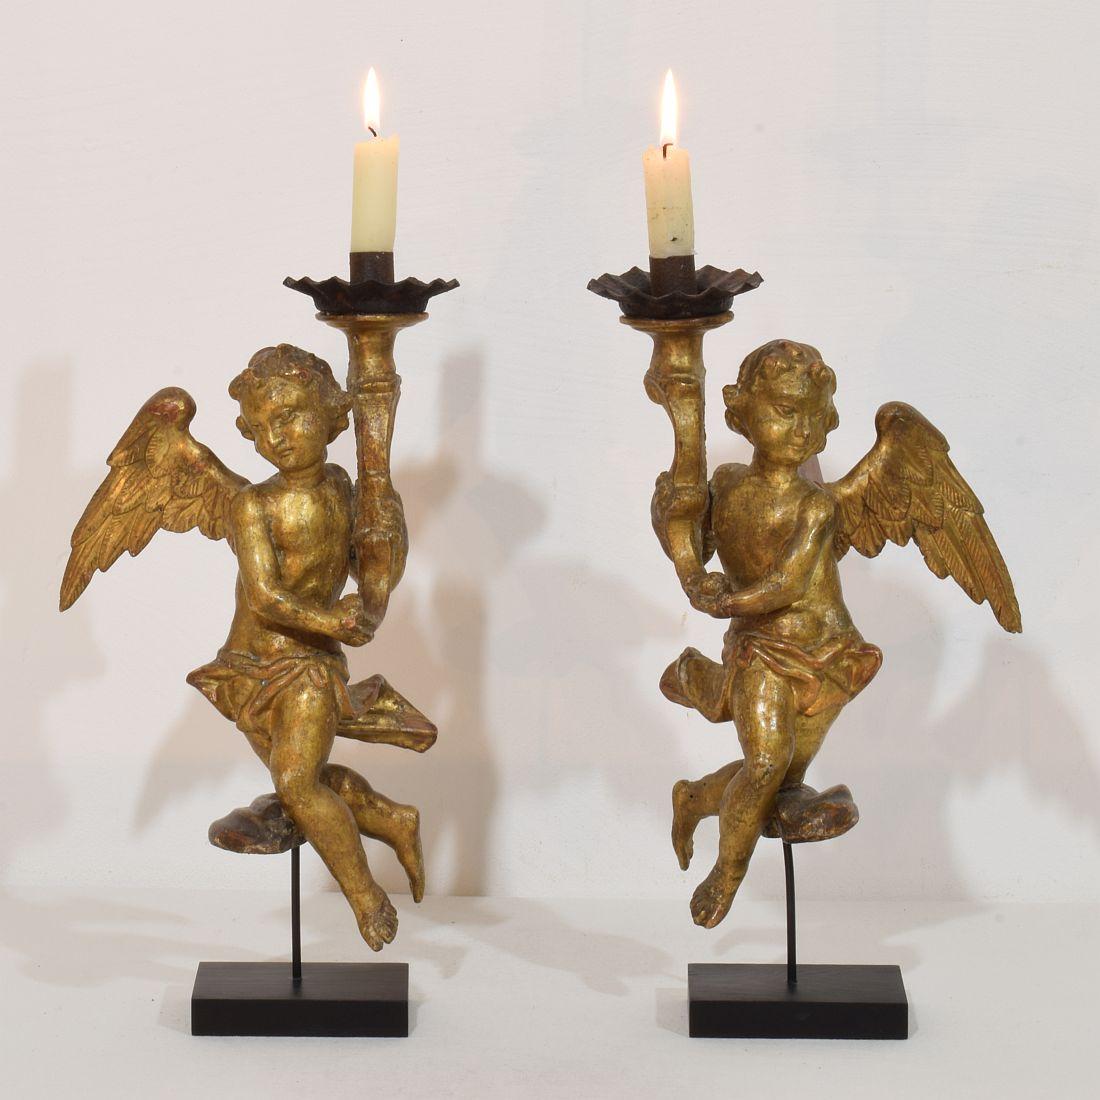 Attractive  pair of small angels with candleholders, Italy, circa 1750. Weathered, small losses and old repairs.
More pictures available on request. Measurements are individual and include the wooden base.